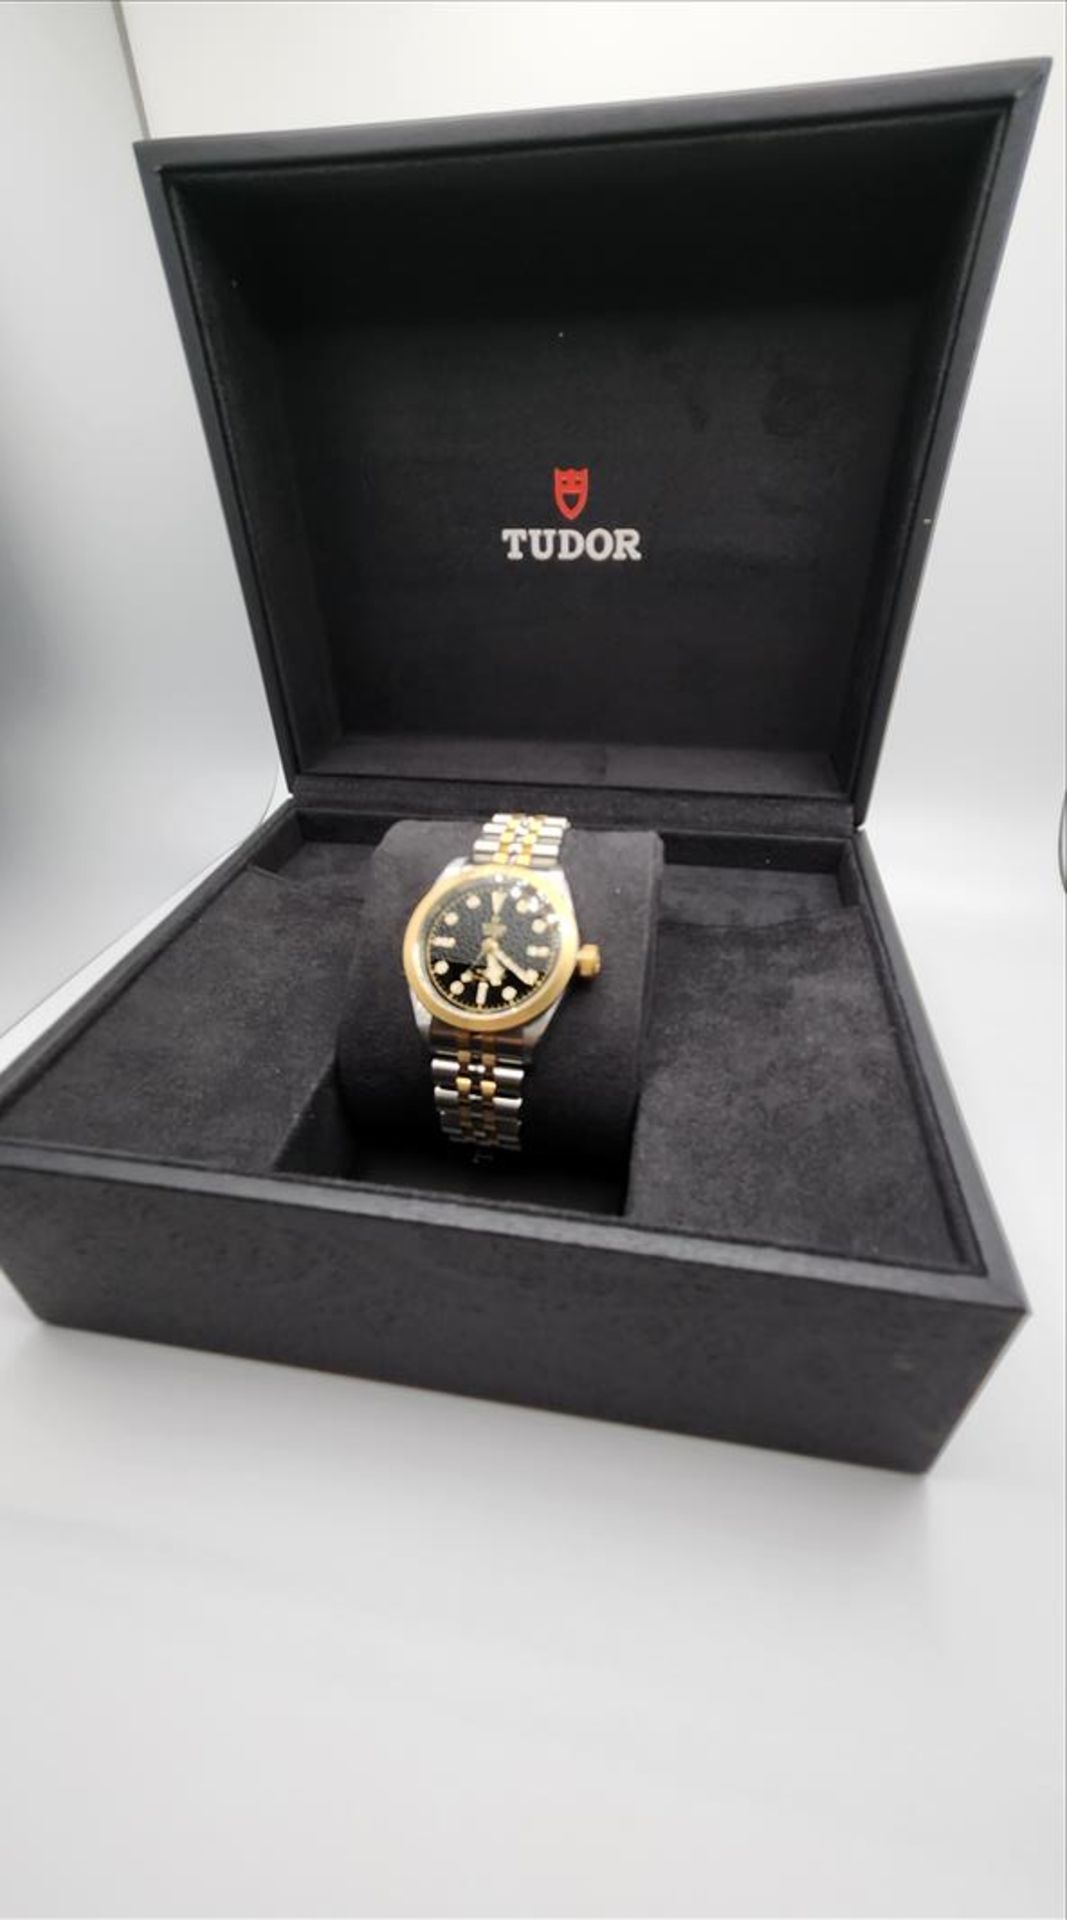 One lady’s Swiss made Tudor Black Bay yellow gold tone and stainless steel (32.0mm) wristwatch (